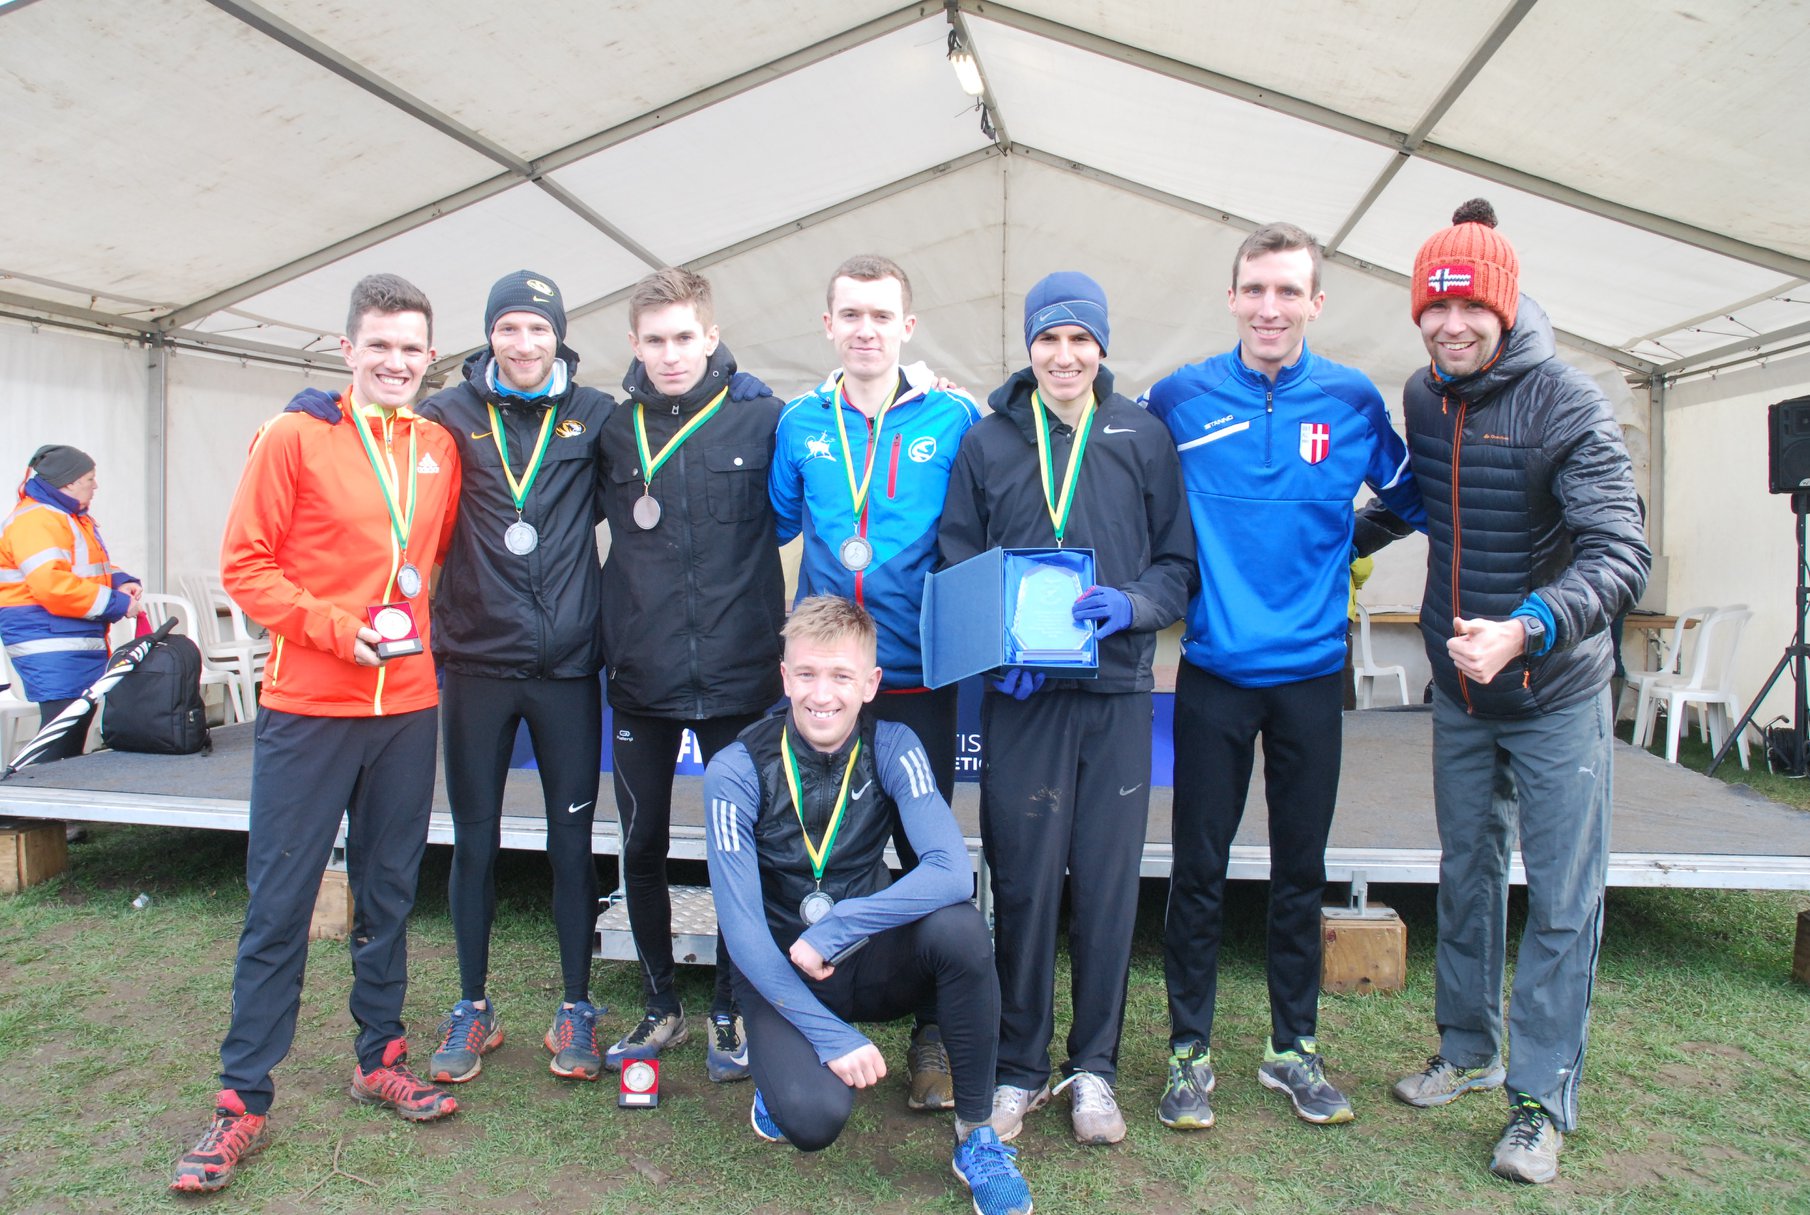 Lancashire Win Medals at Inter-Counties Championships – Pauline Wins Todmorden 10k – Trafford 10k with Jacob & Calum – Tom Wins Roddleworth Roller – A Win for Jaydon at Sportscity